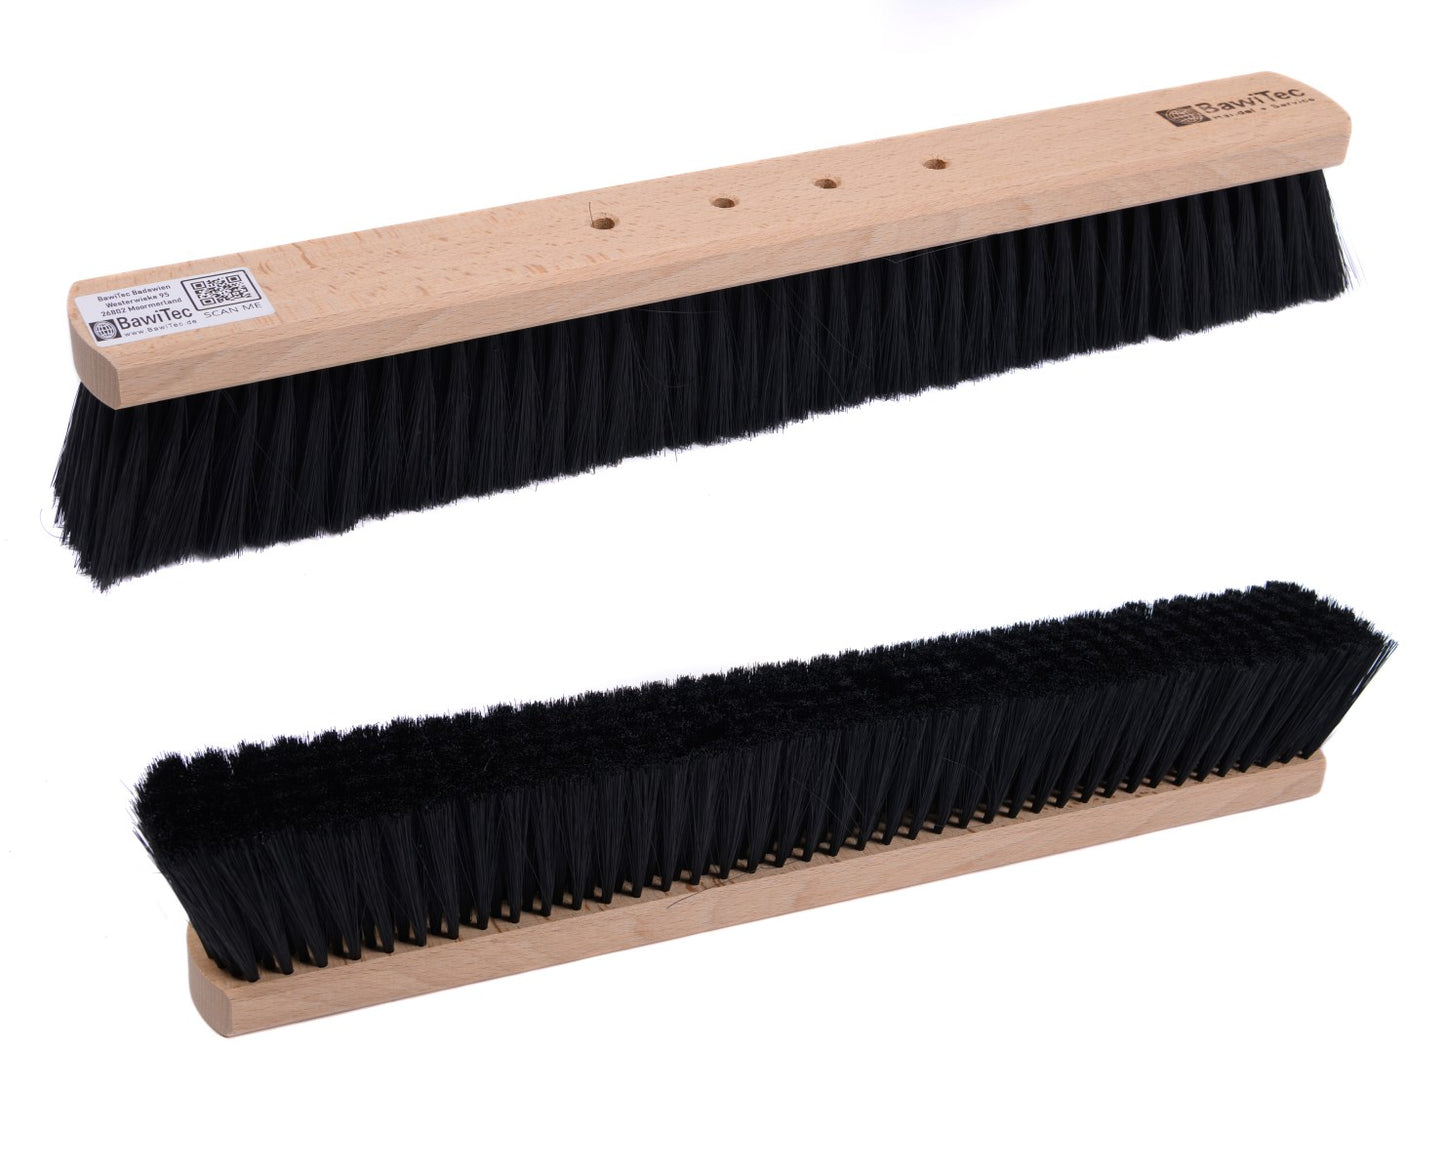 Hall broom synthetic hair bristles black with 4-hole changing system, without handle